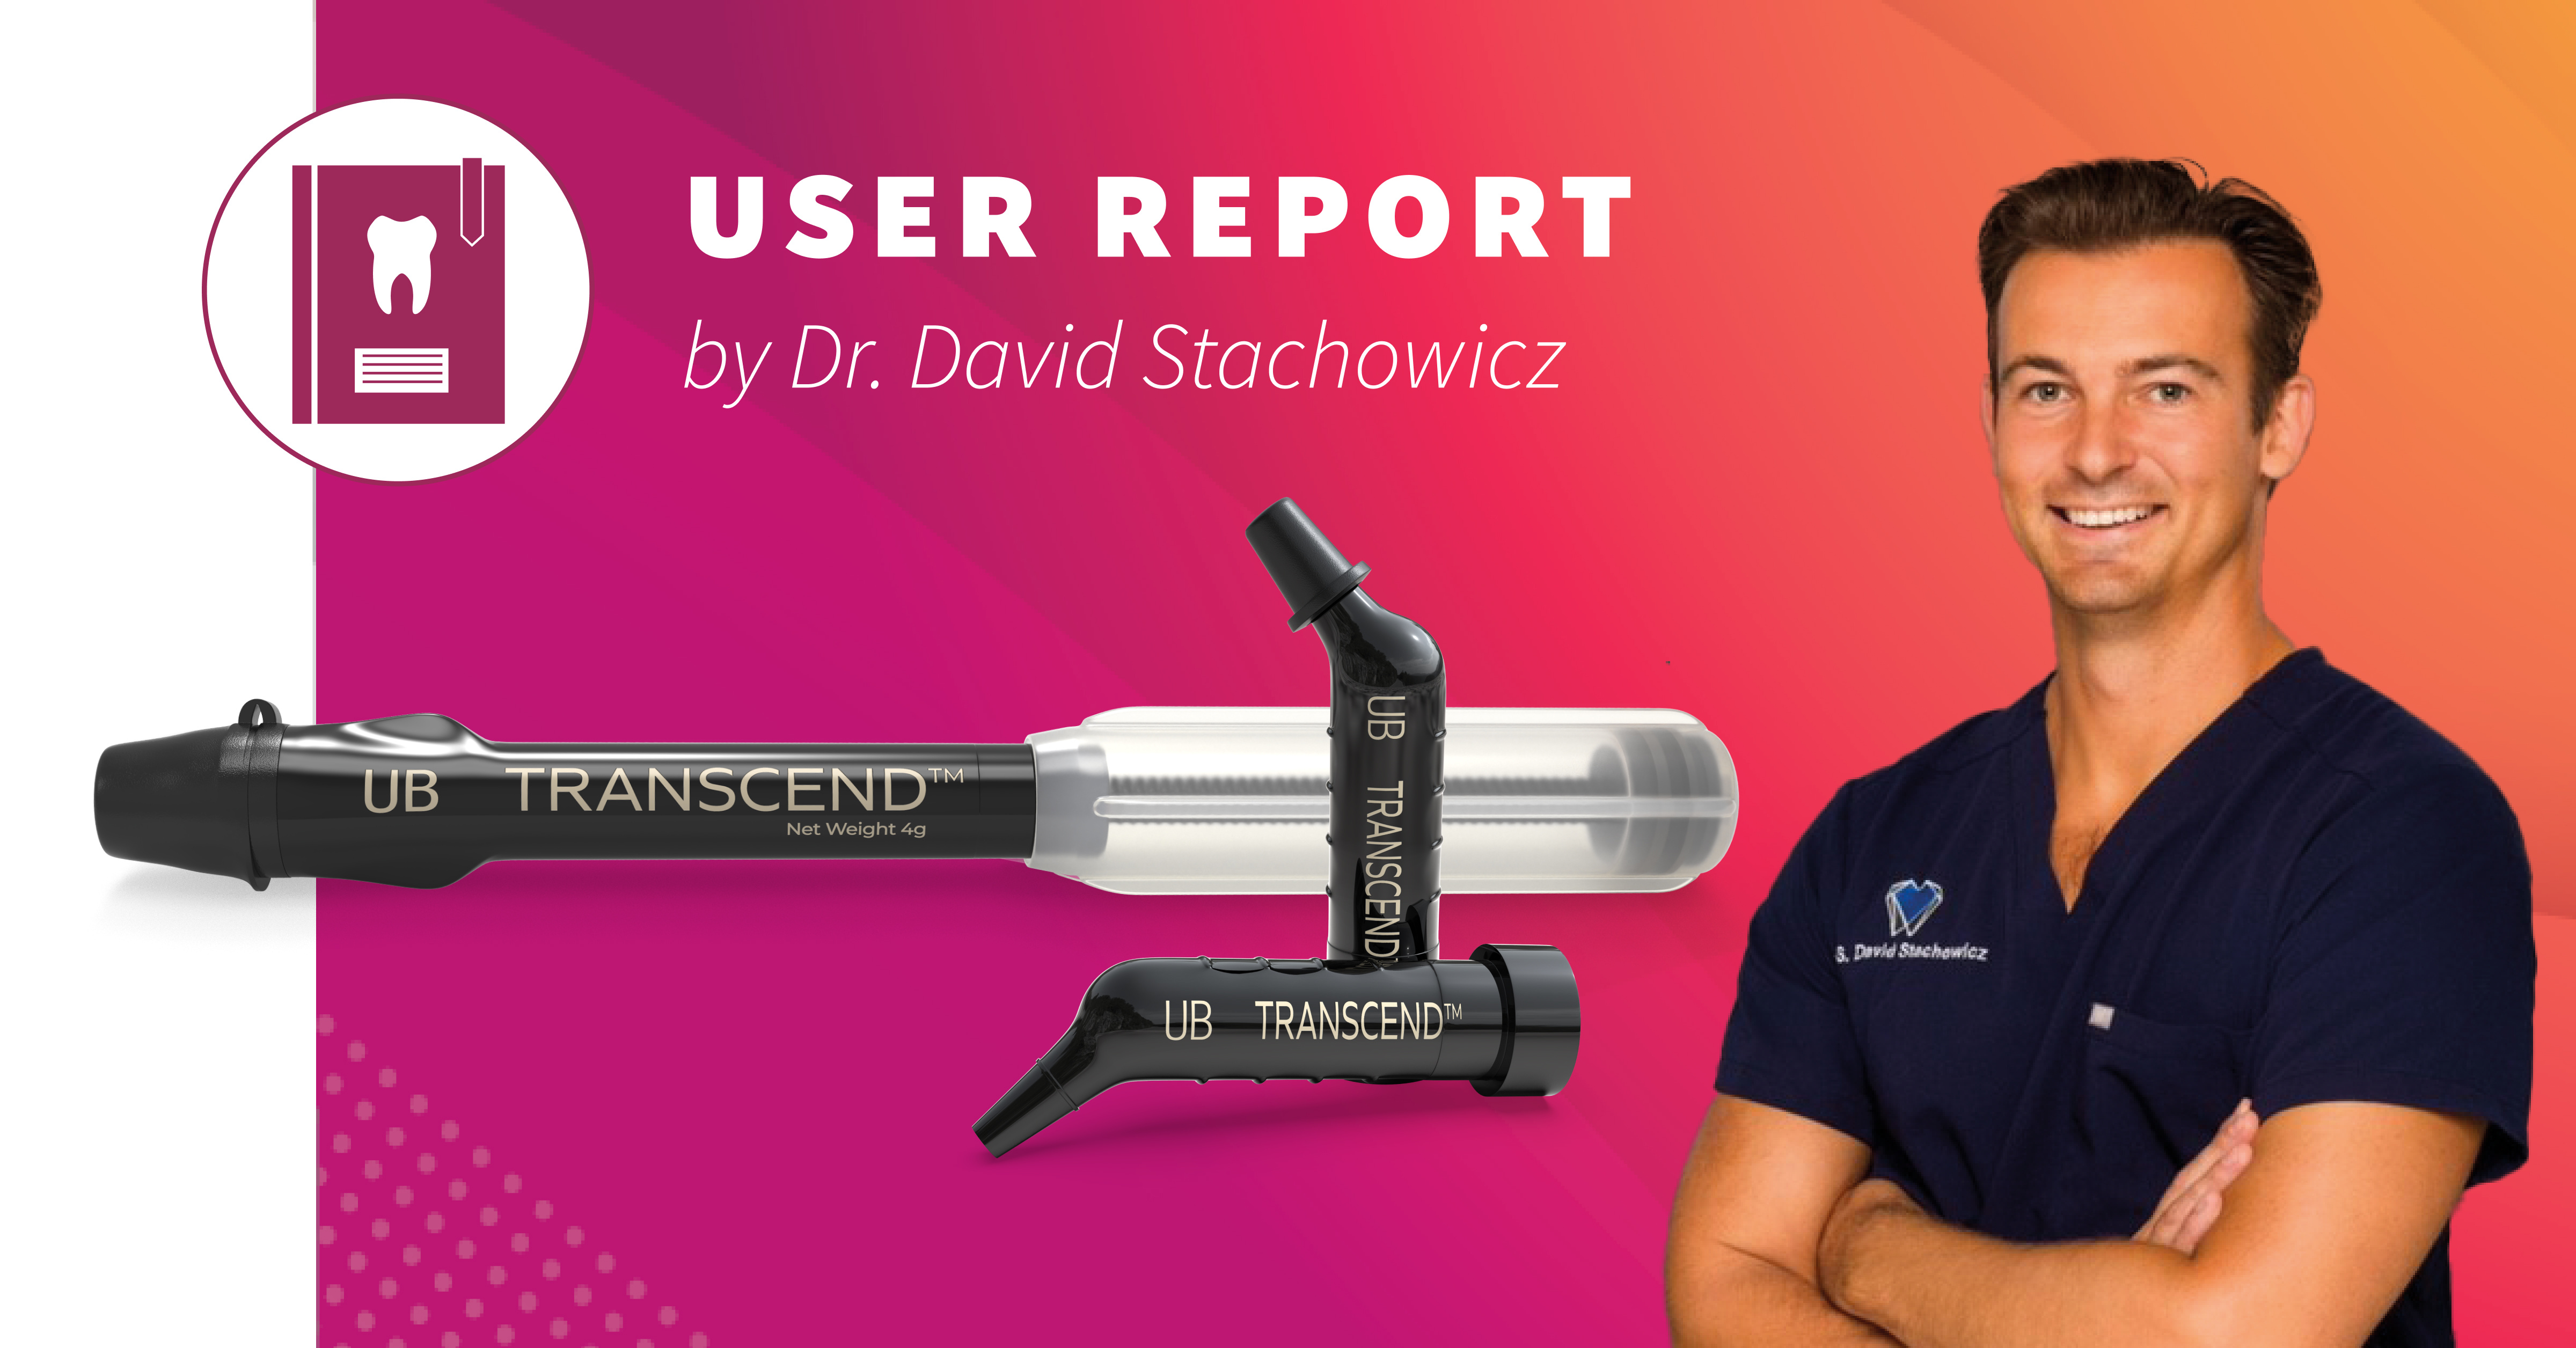 "Transcend™ Universal Composite Facilitates my Daily Practice Life Significantly and Convinced me Completely."